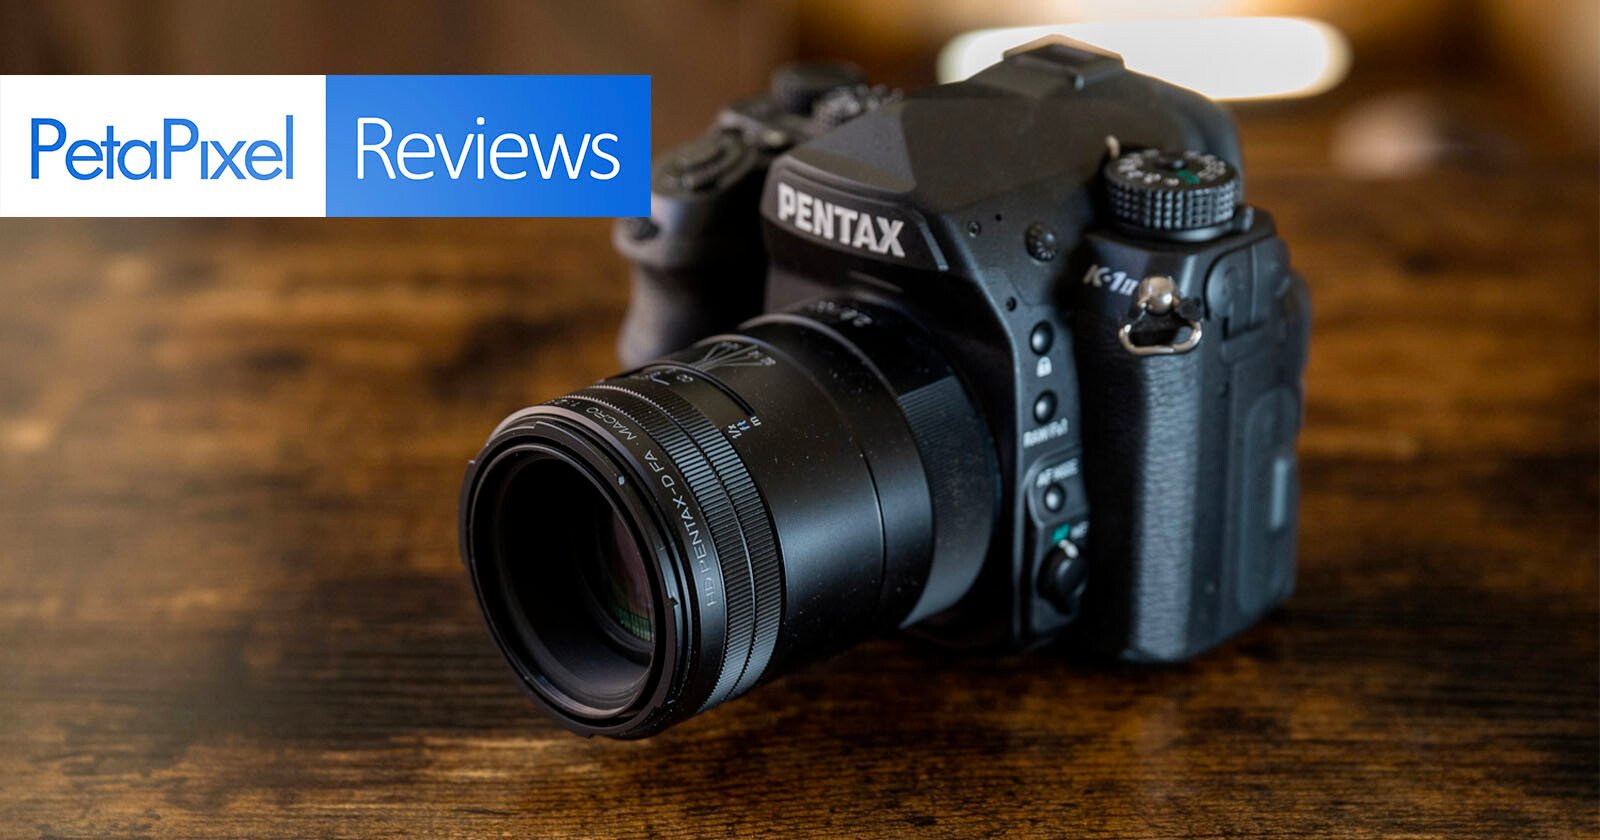 Pentax 100mm f/2.8 Macro Review: Great Quality in an Outdated Package